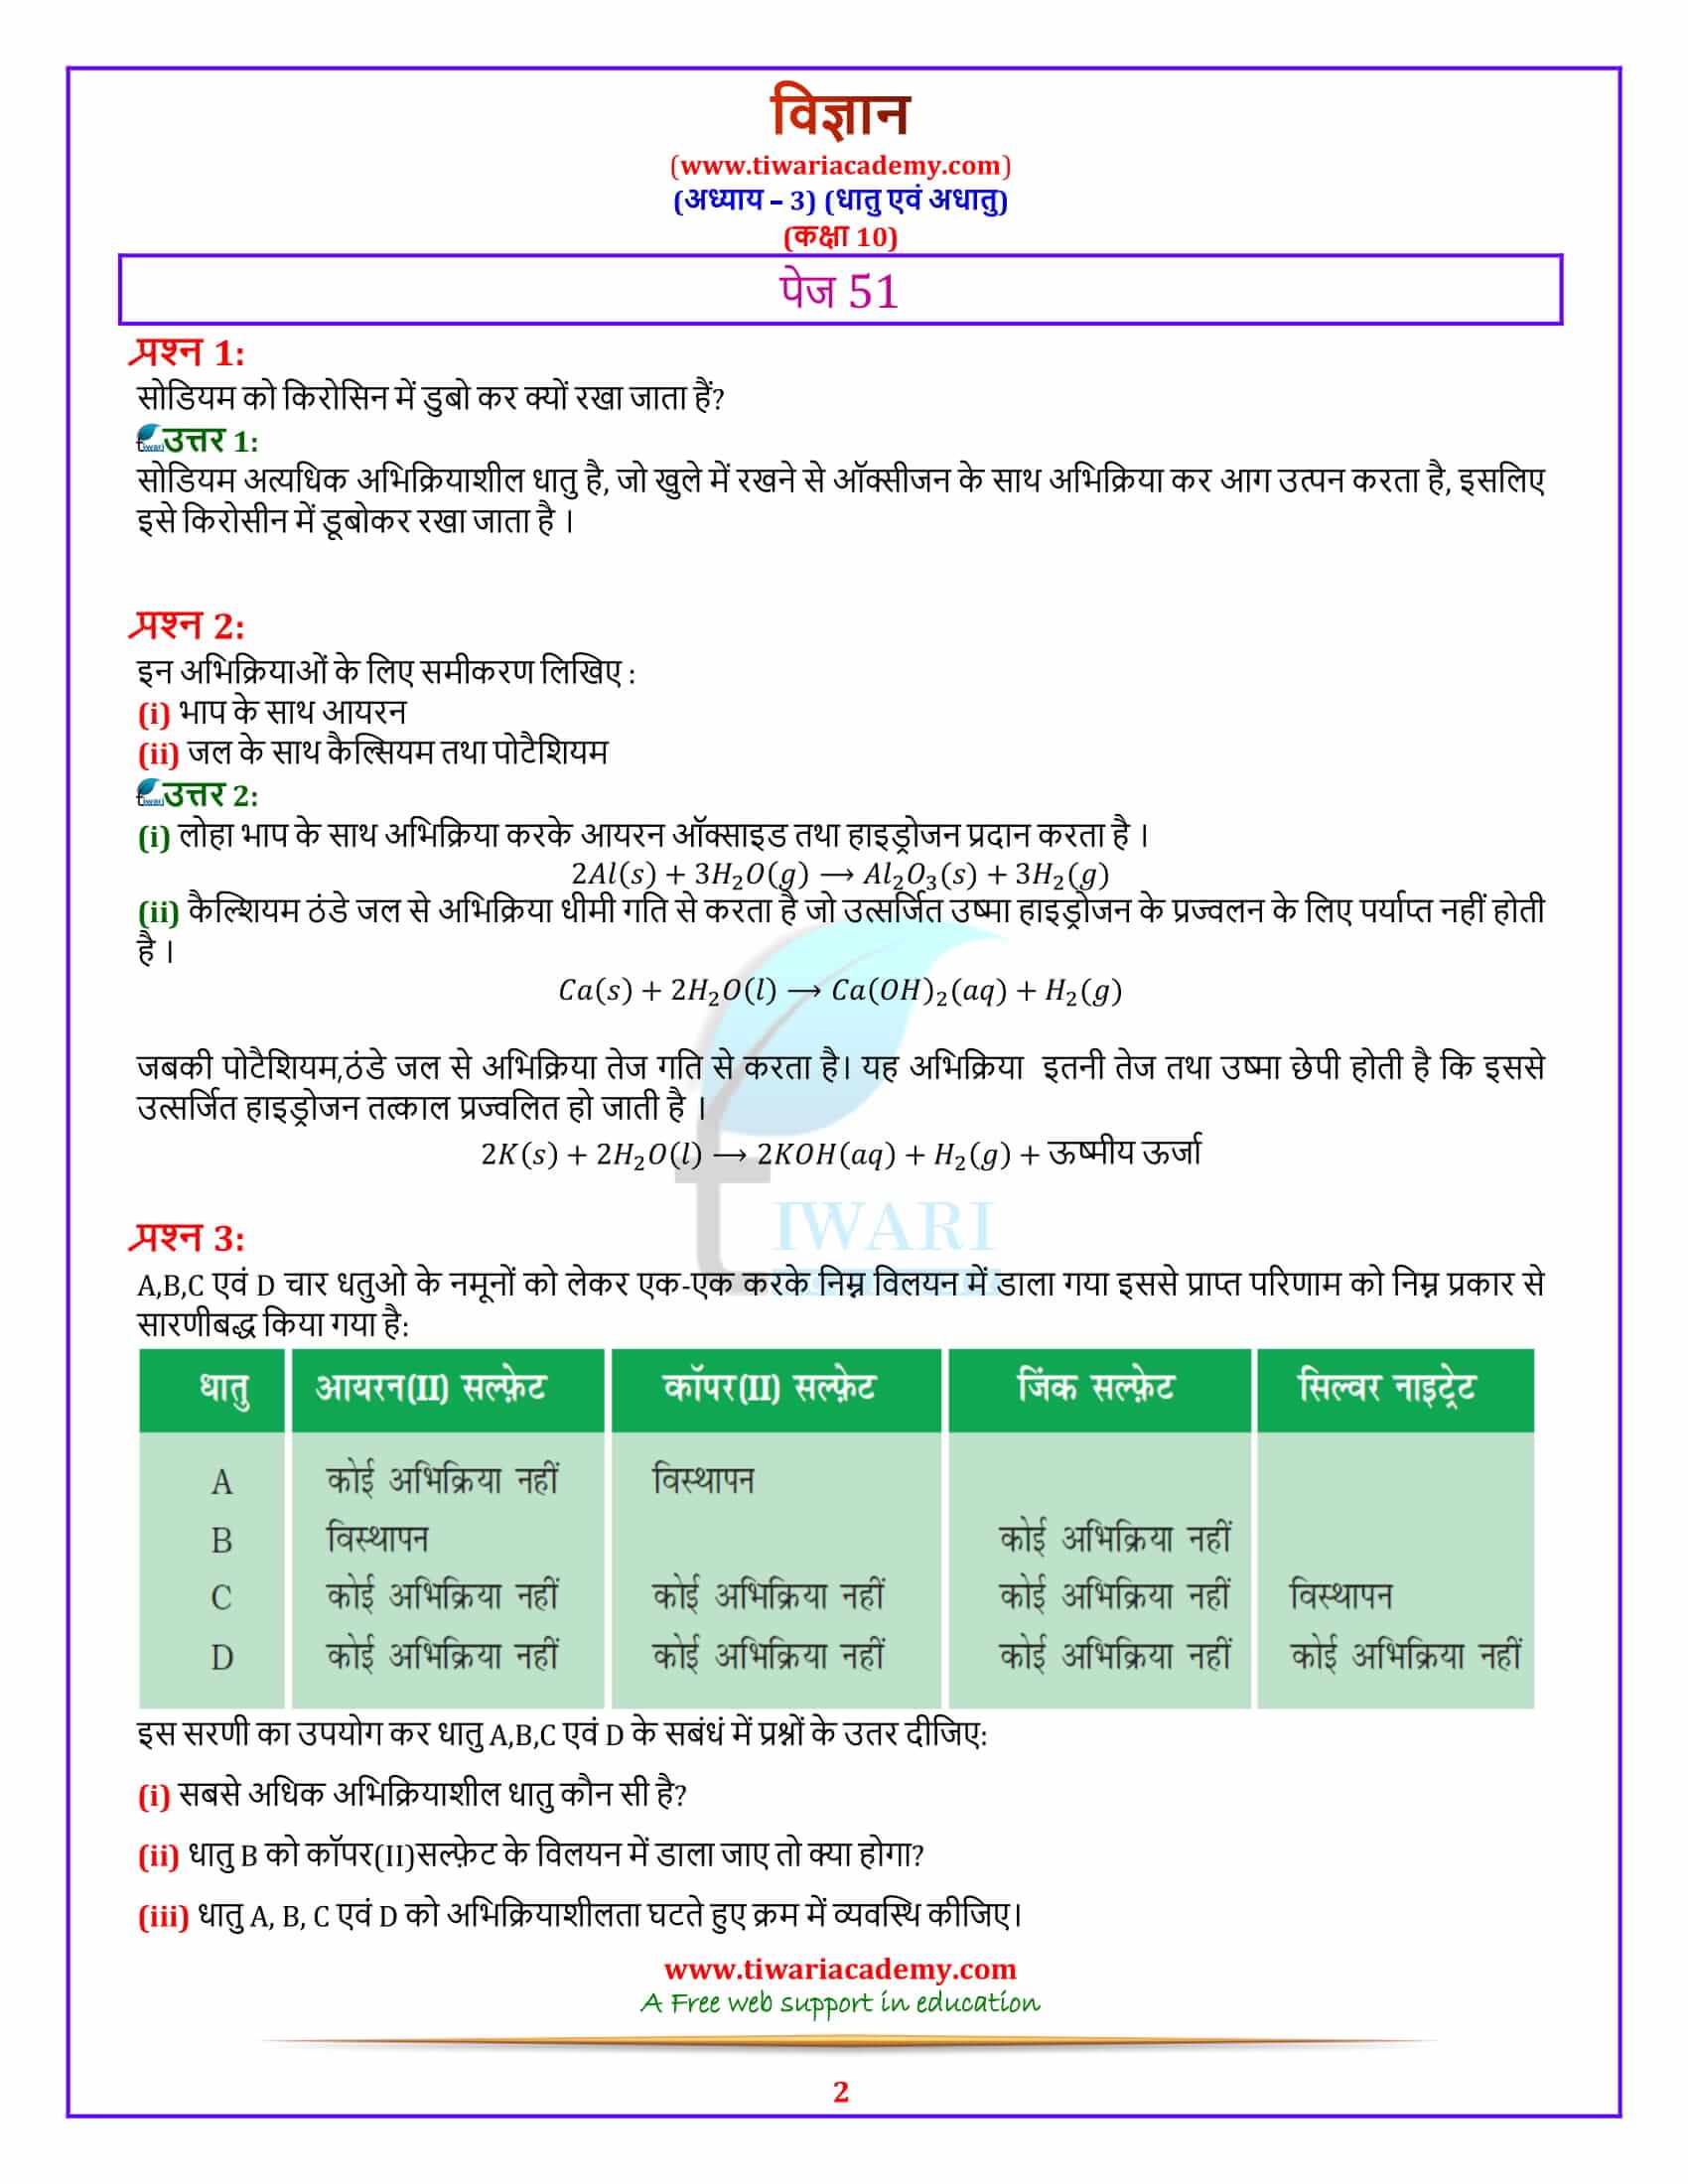 10 Science Chapter 3 Metals and Non-Metals पेज 51 के उत्तर